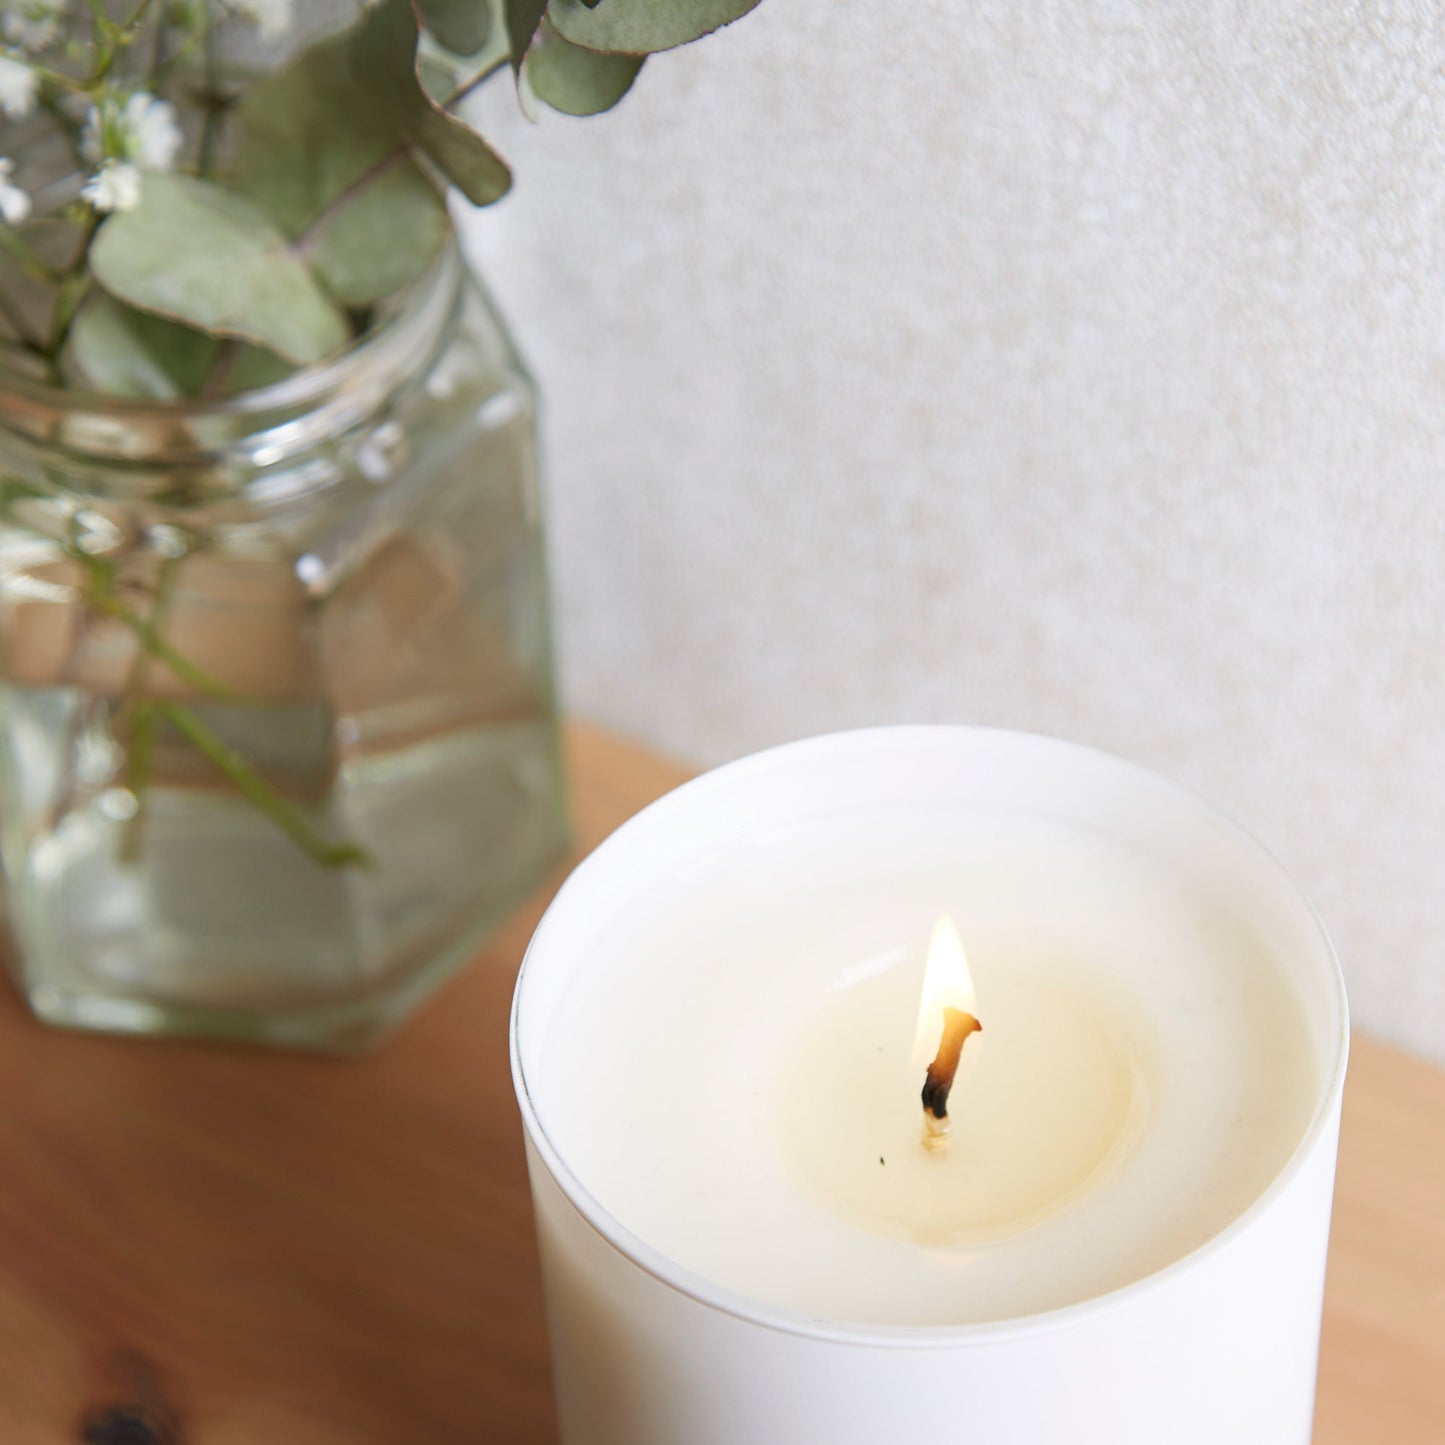 Graduation Gift for Her Best Is Yet To Come White Candle - Kindred Fires